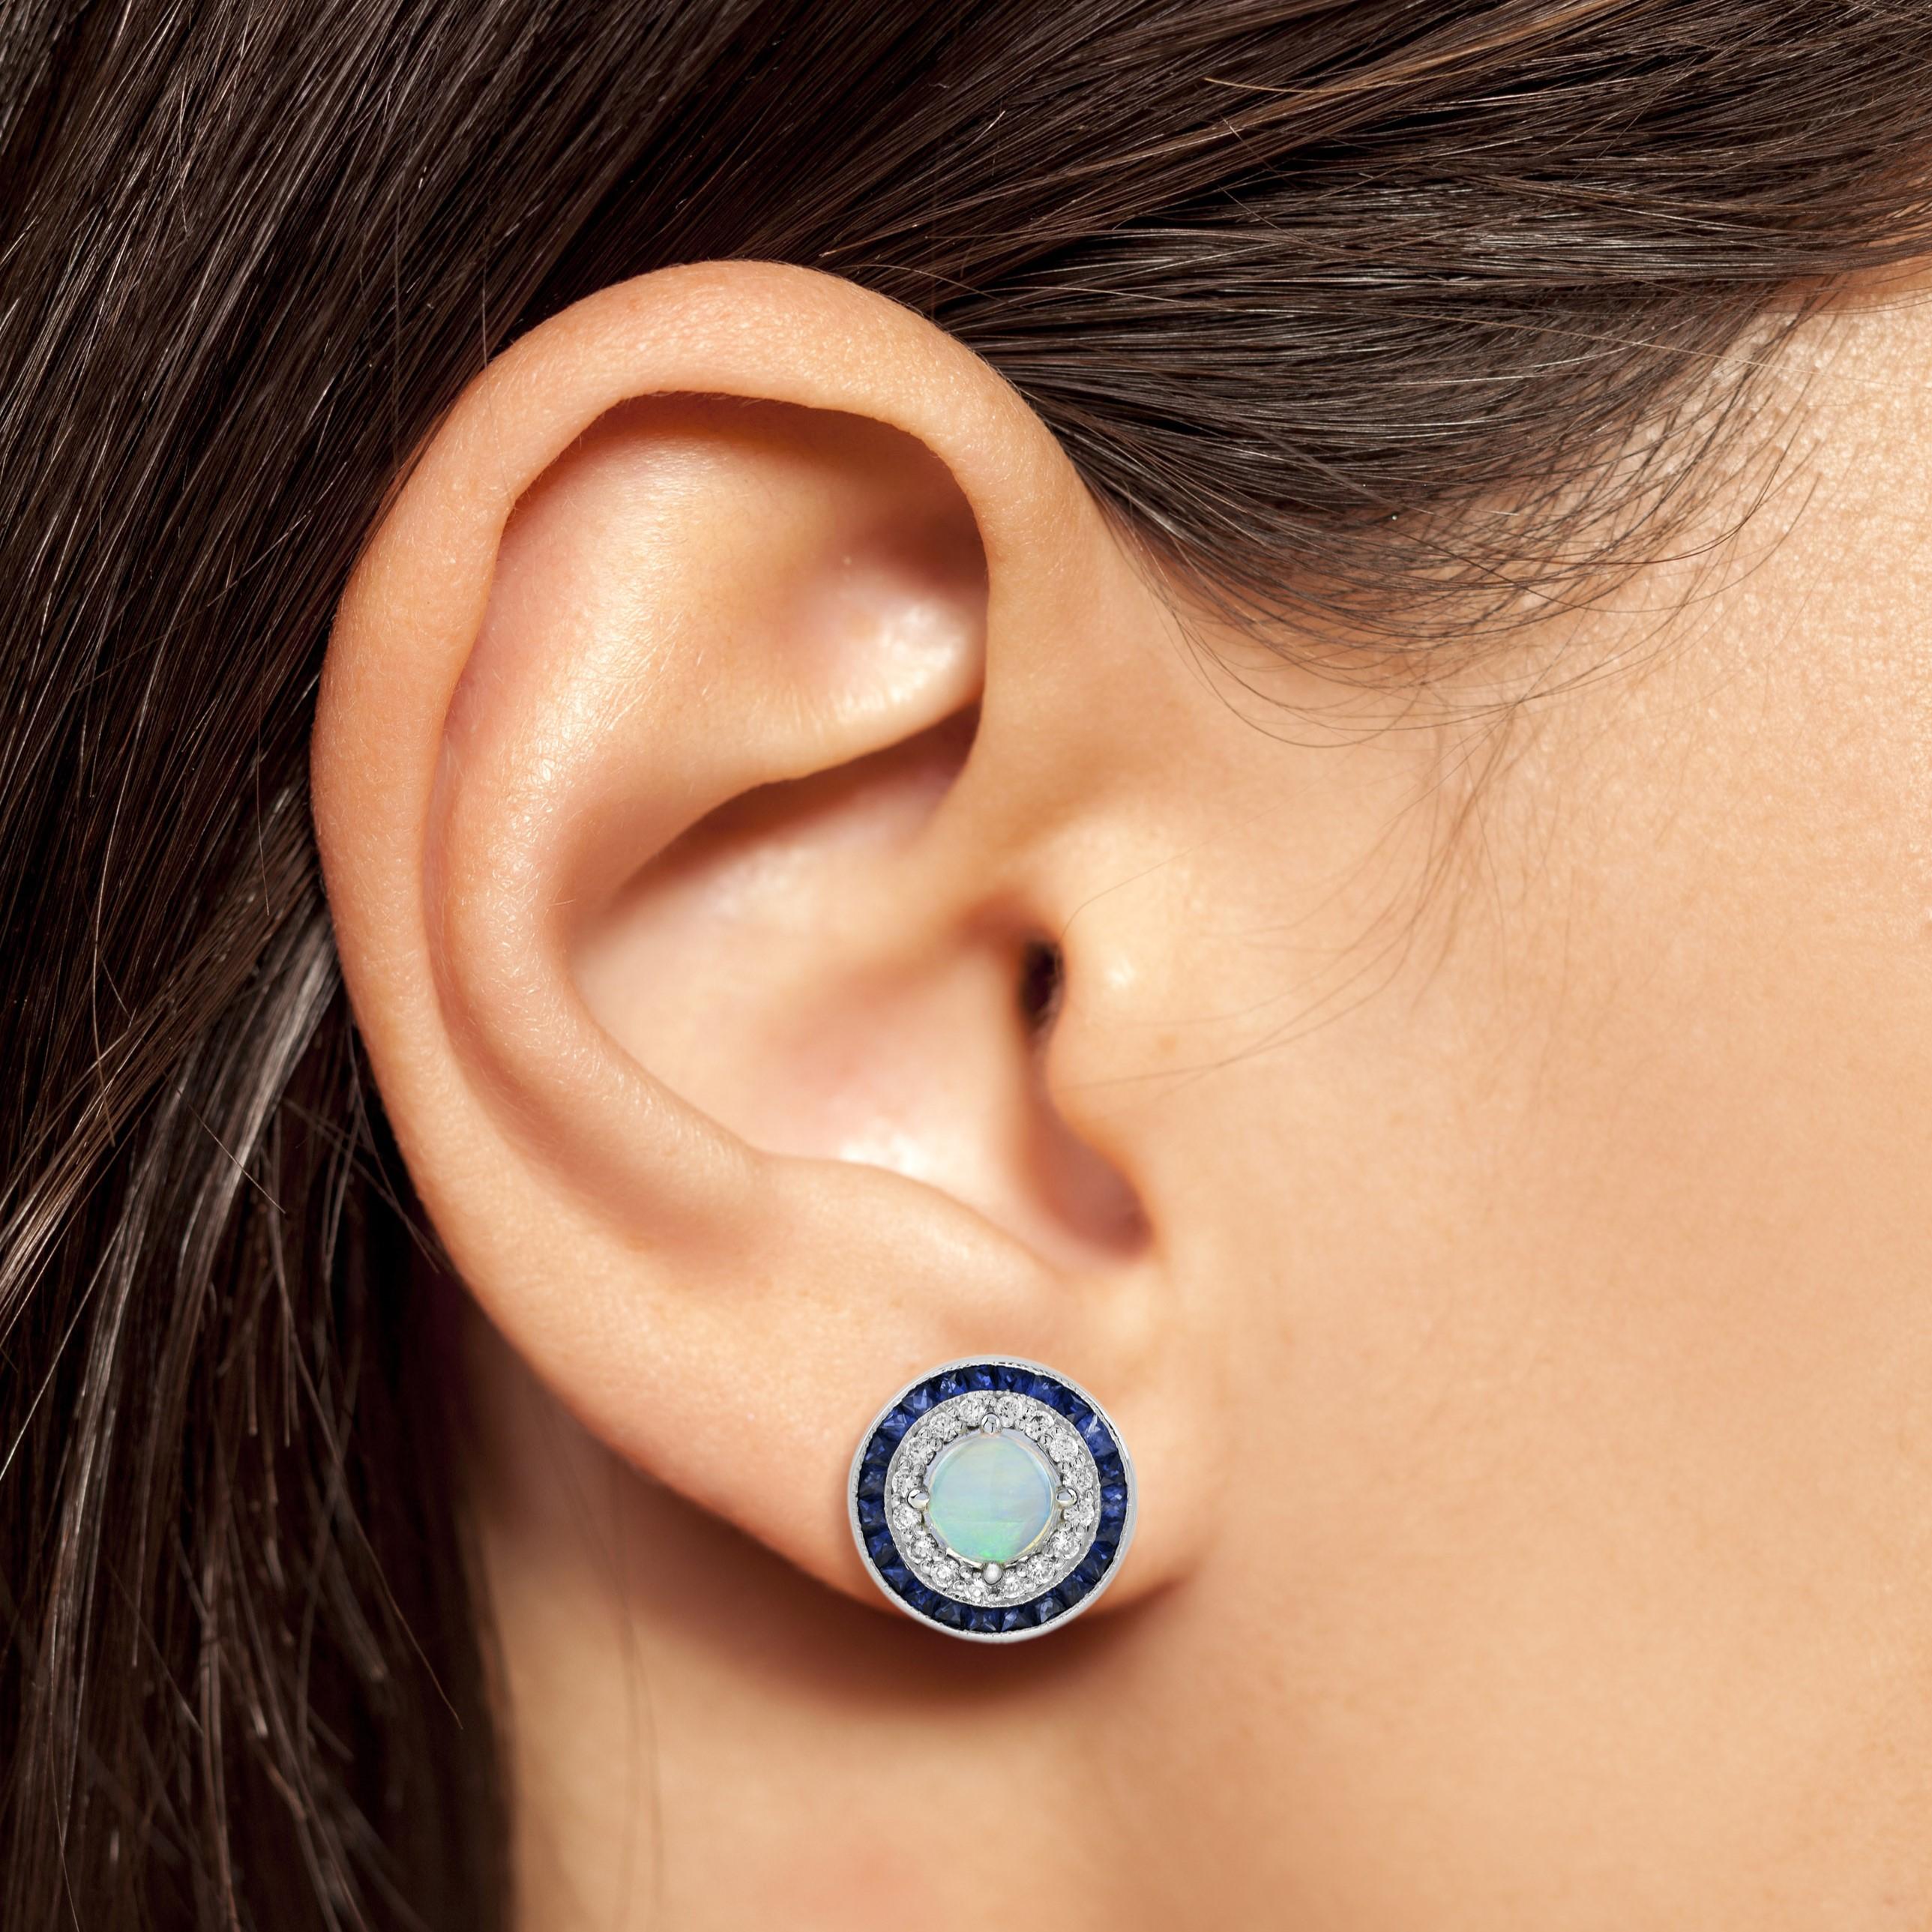 These Art-Deco stud earrings are completely spectacular! The sparkling diamonds and vibrant blue sapphires surround the excellent play of color center opal, which is in a thin bezel with millgrain detail. Crafted in 18k white gold.

Earrings